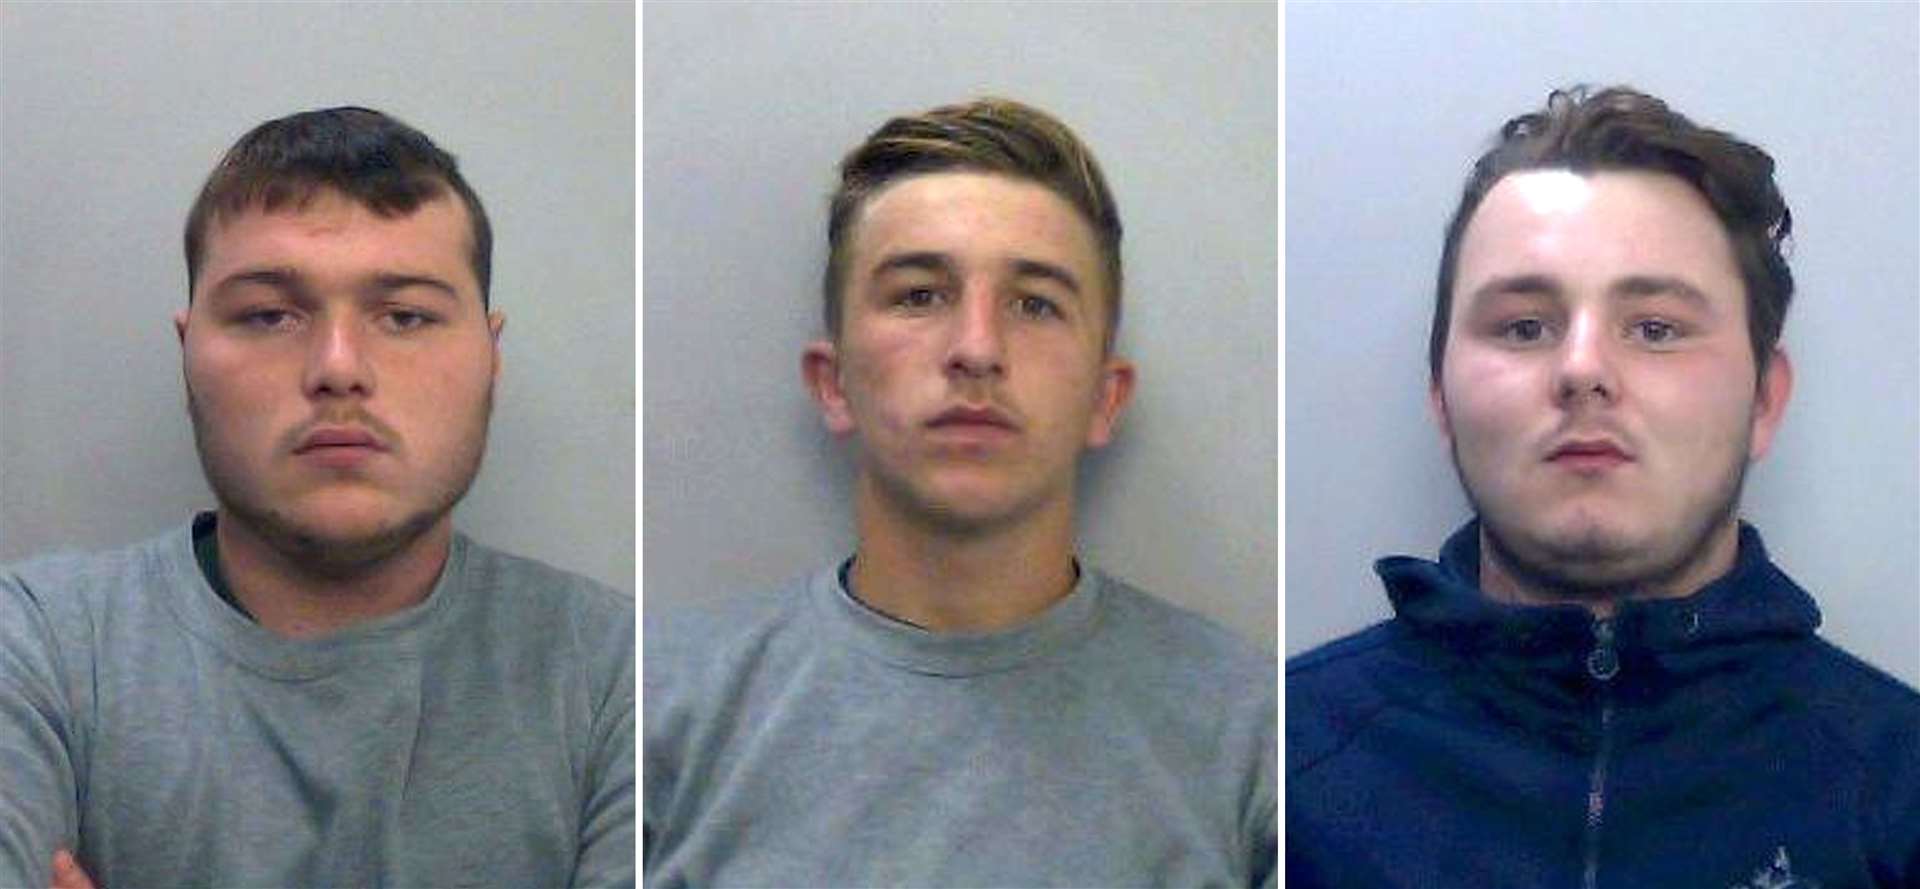 Henry Long, Jessie Cole and Albert Bowers were jailed for killing Pc Andrew Harper (Thames Valley Police/PA)